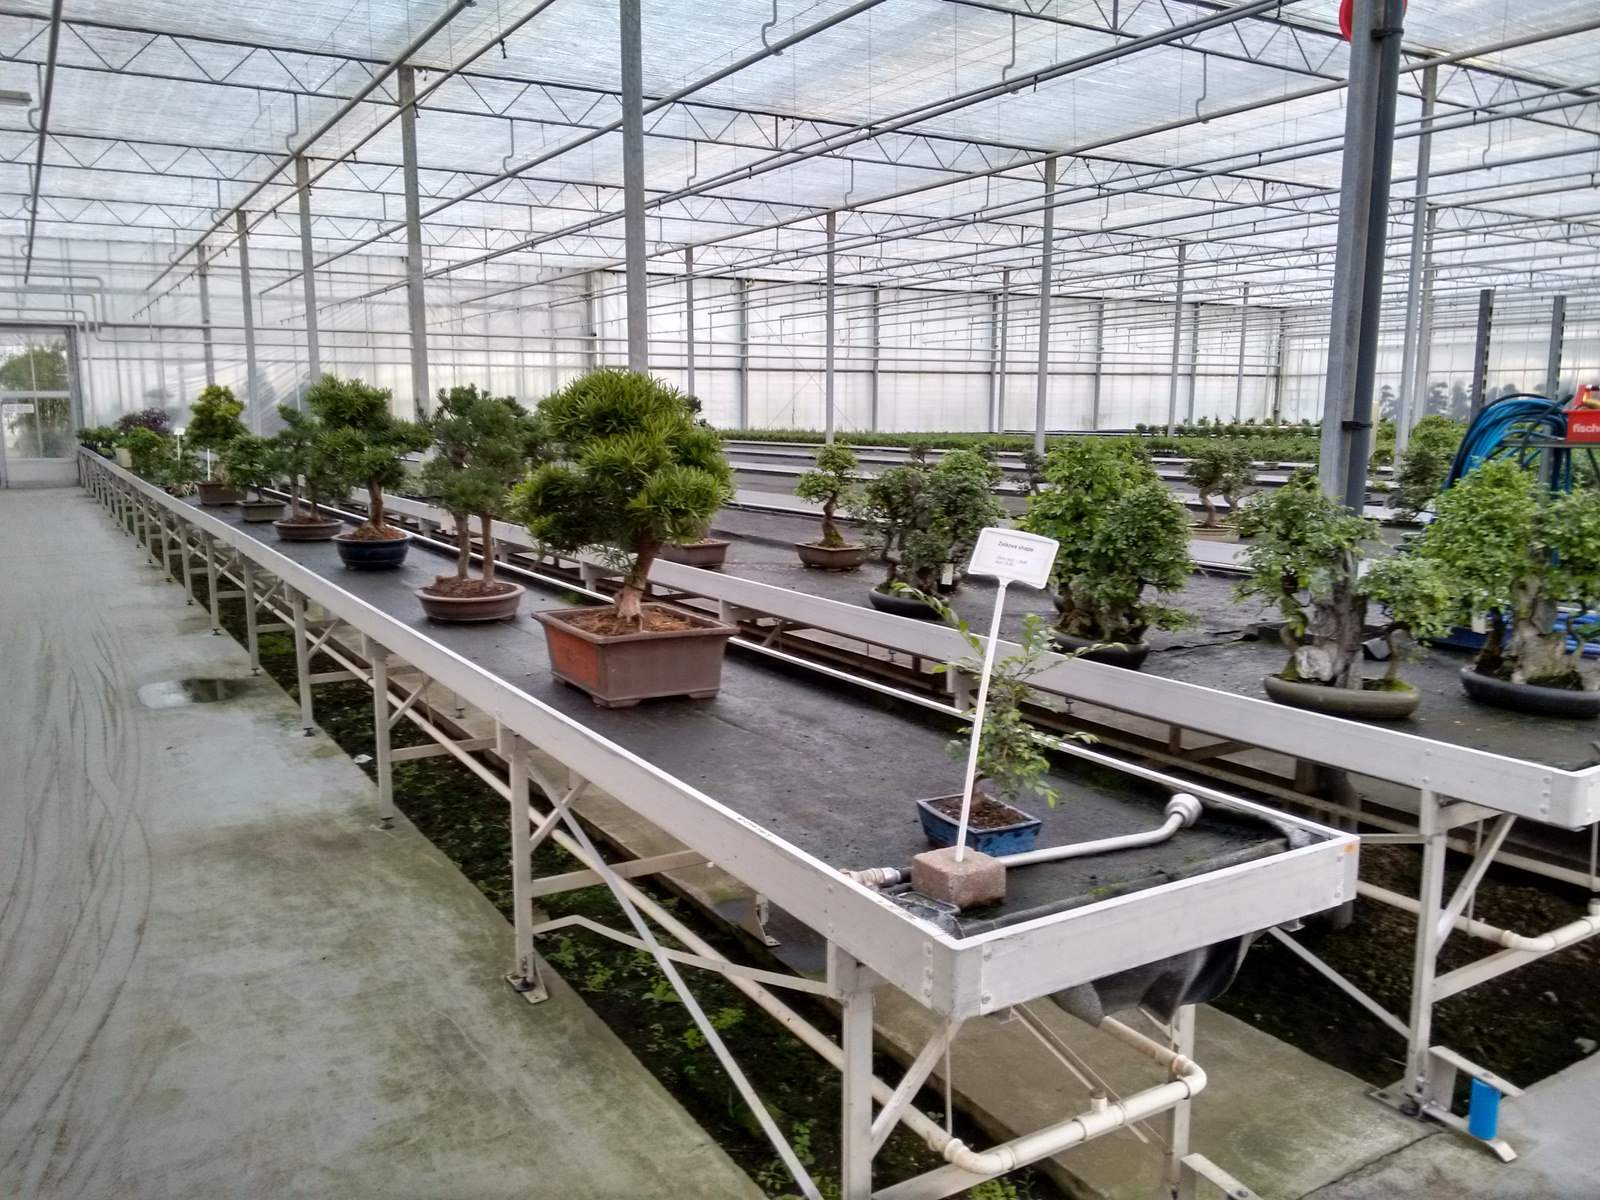 bonsai lodder1 Bonsai Lodder   One of the Largest Bonsai Store in the World, Netherlands